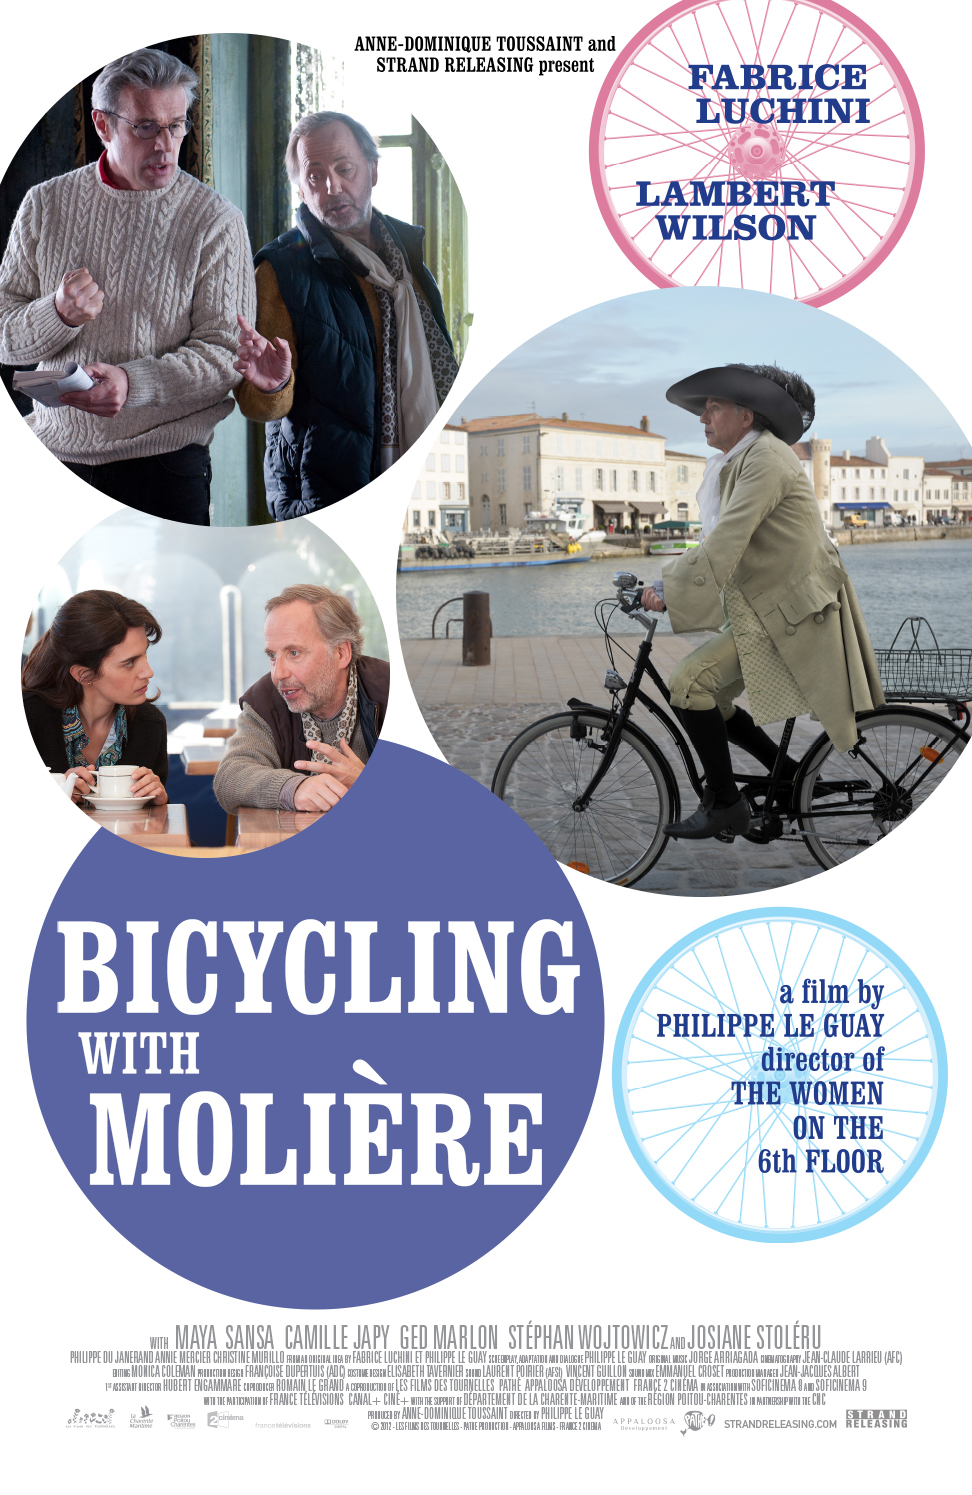 BICYCLING WITH MOLIERE